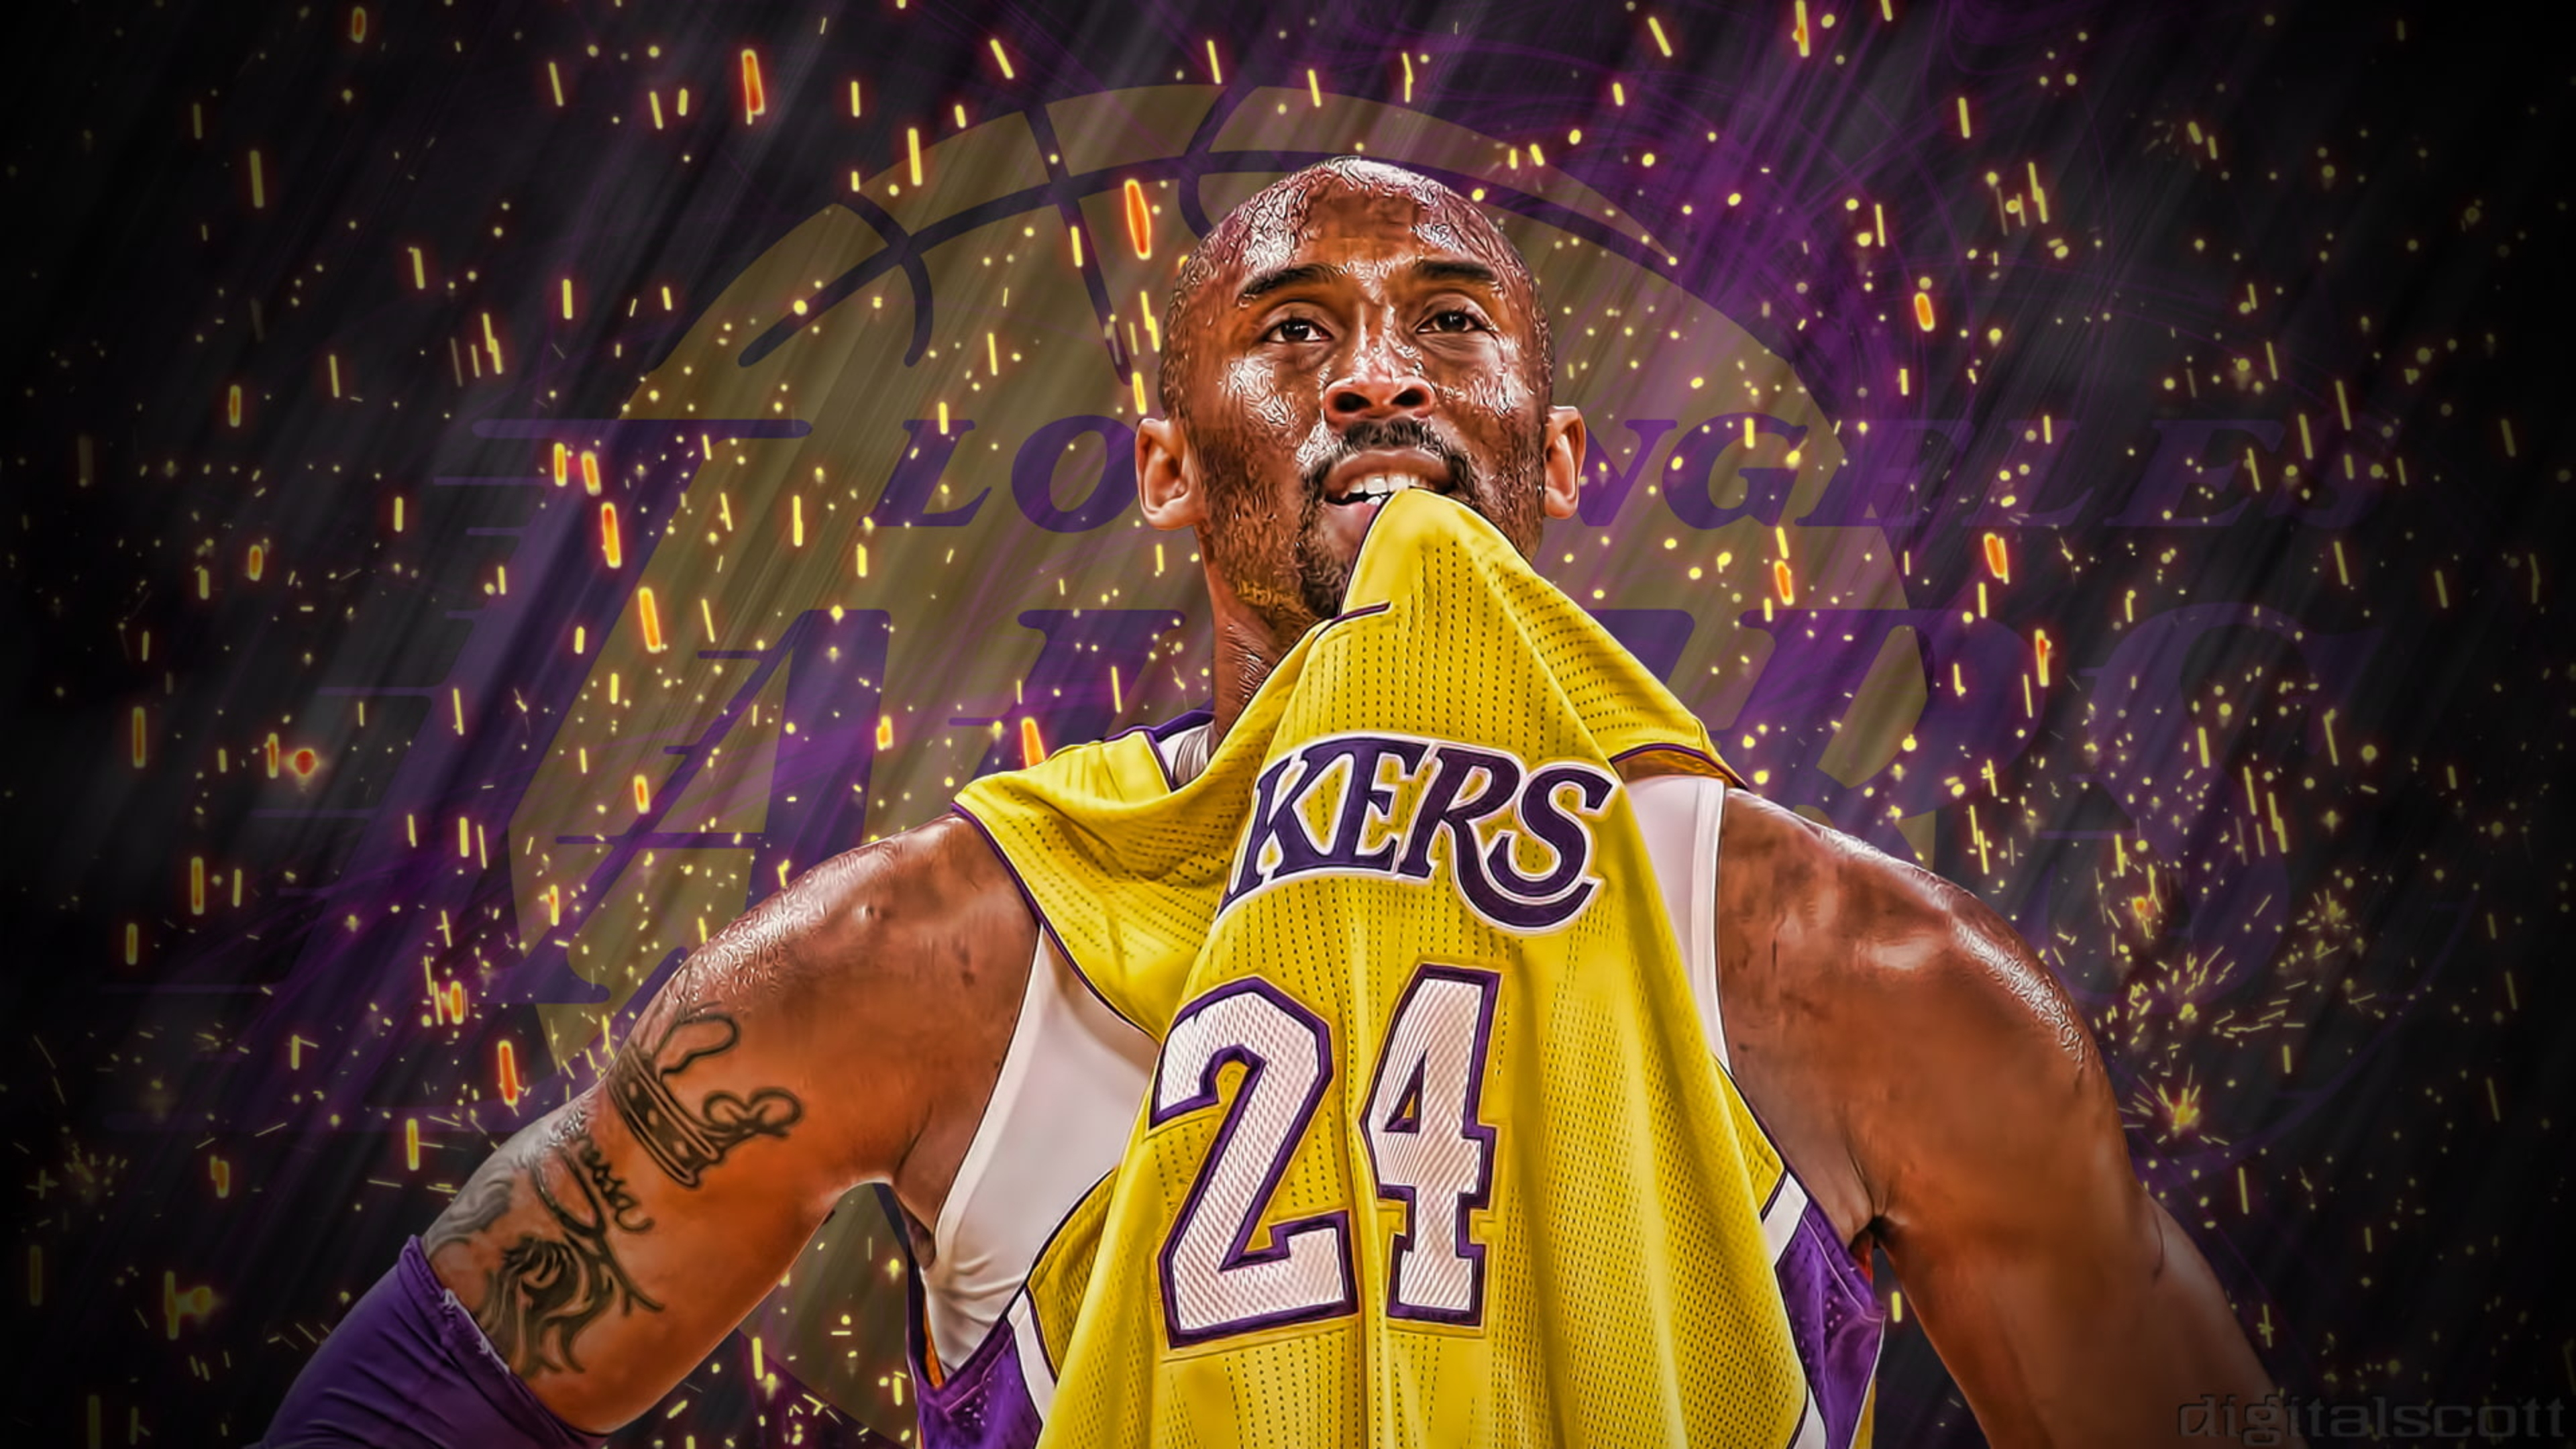 Kobe Bean Bryant Is Biting His T-shirt In A Fire Sparkle Wallpaper K 2K Celebrities